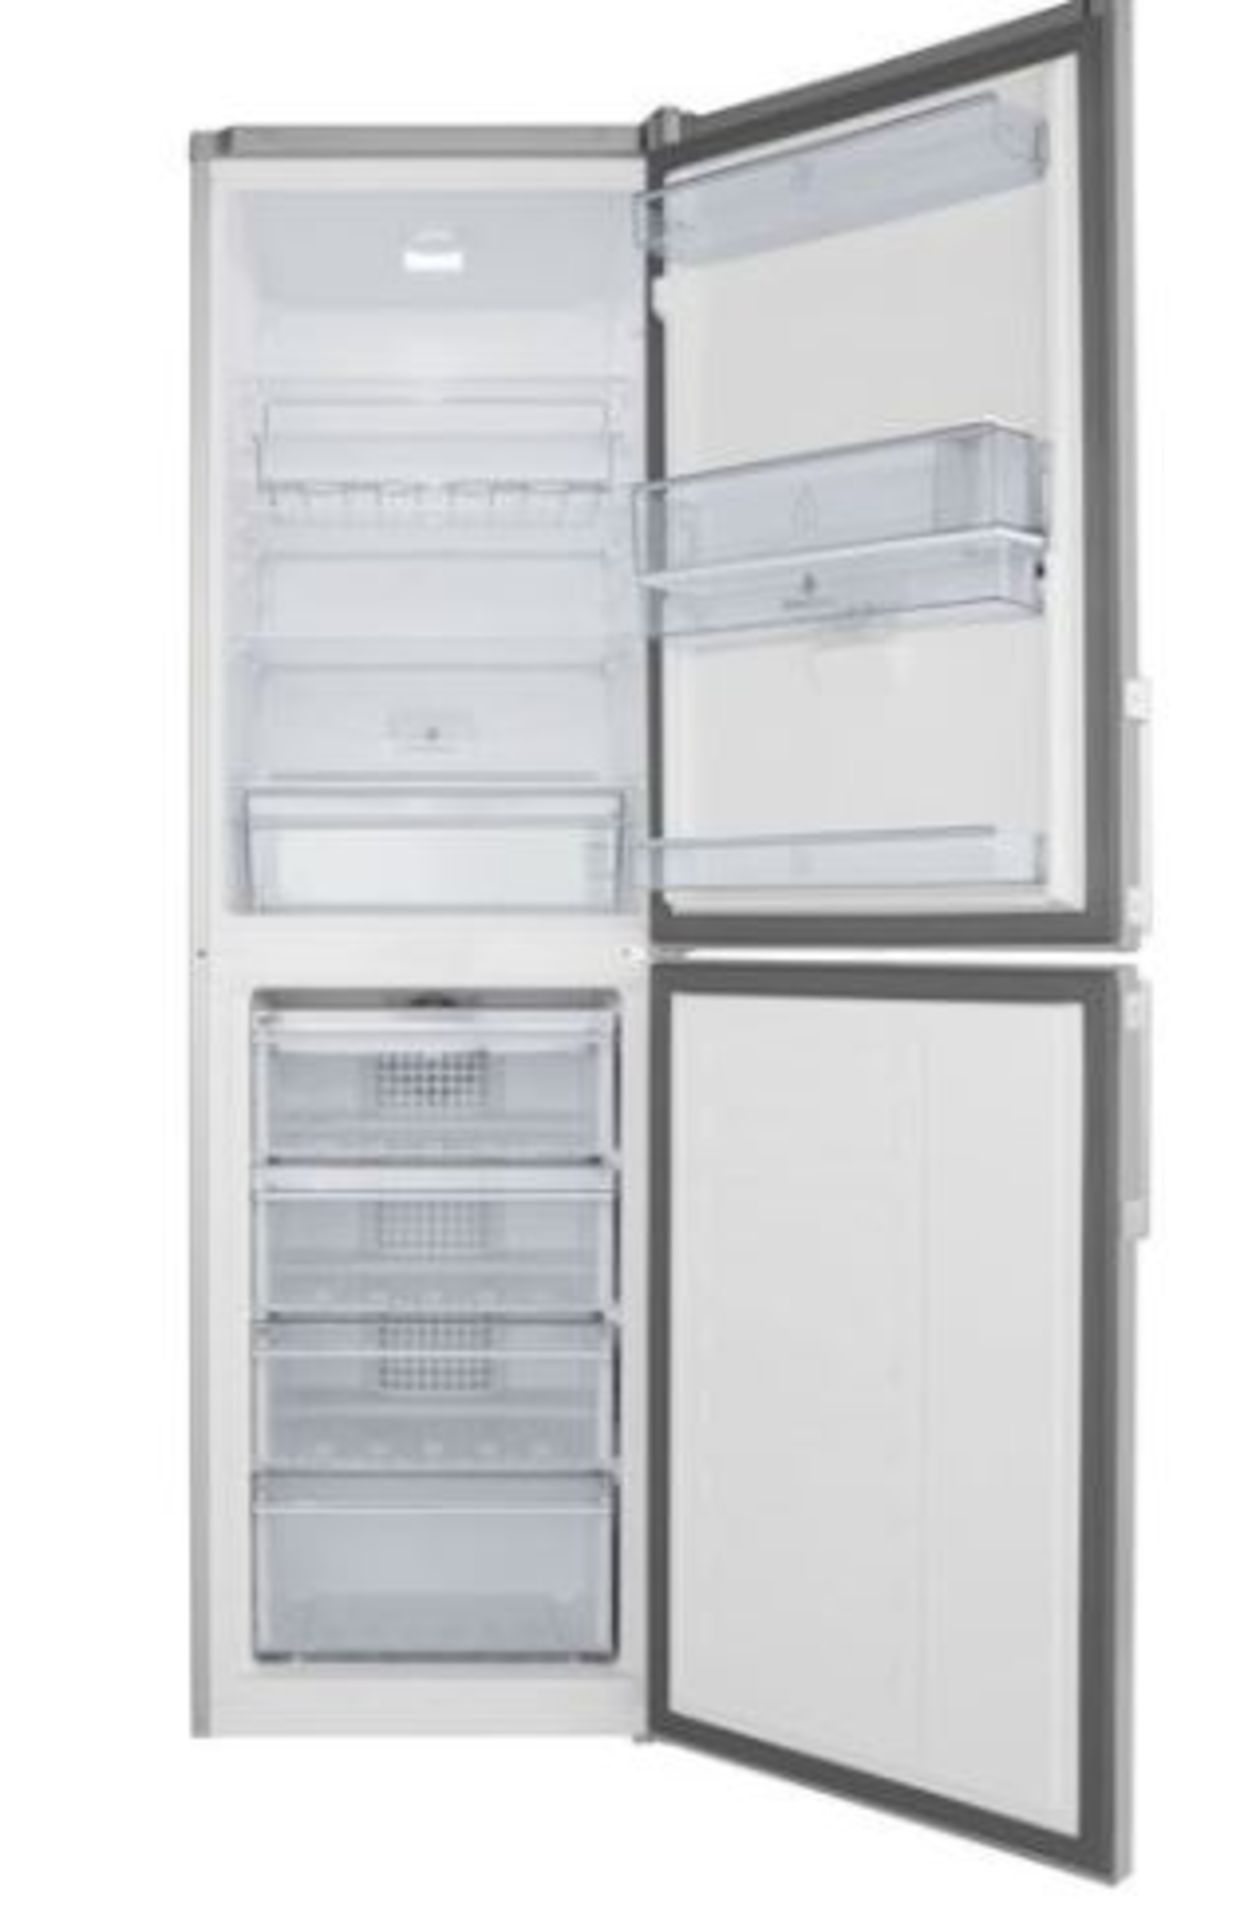 2 Pallets of Mixed White Goods. Brands include BEKO & HOTPOINT. Latest selling price £1,417 - Image 2 of 5